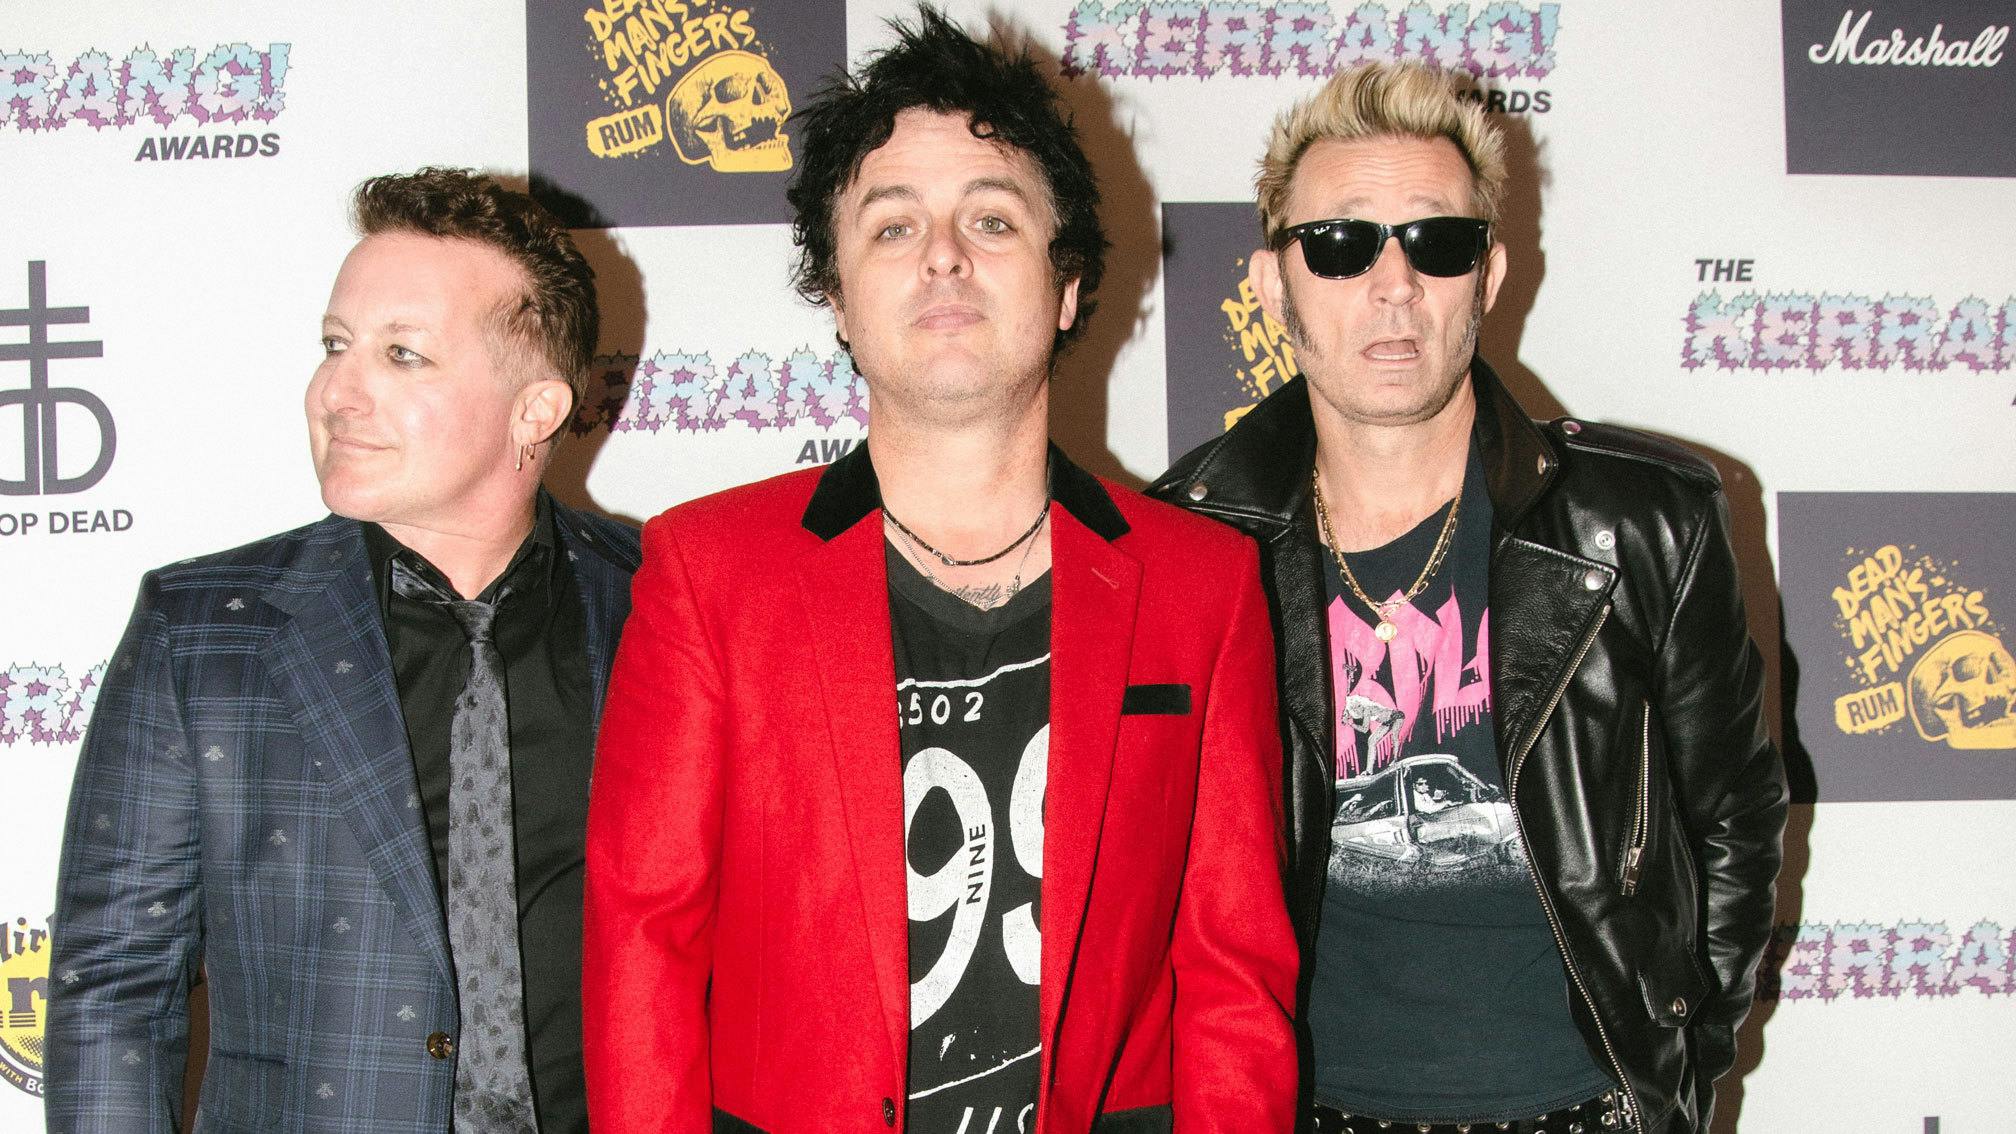 In pictures: The Kerrang! Awards 2022 red carpet